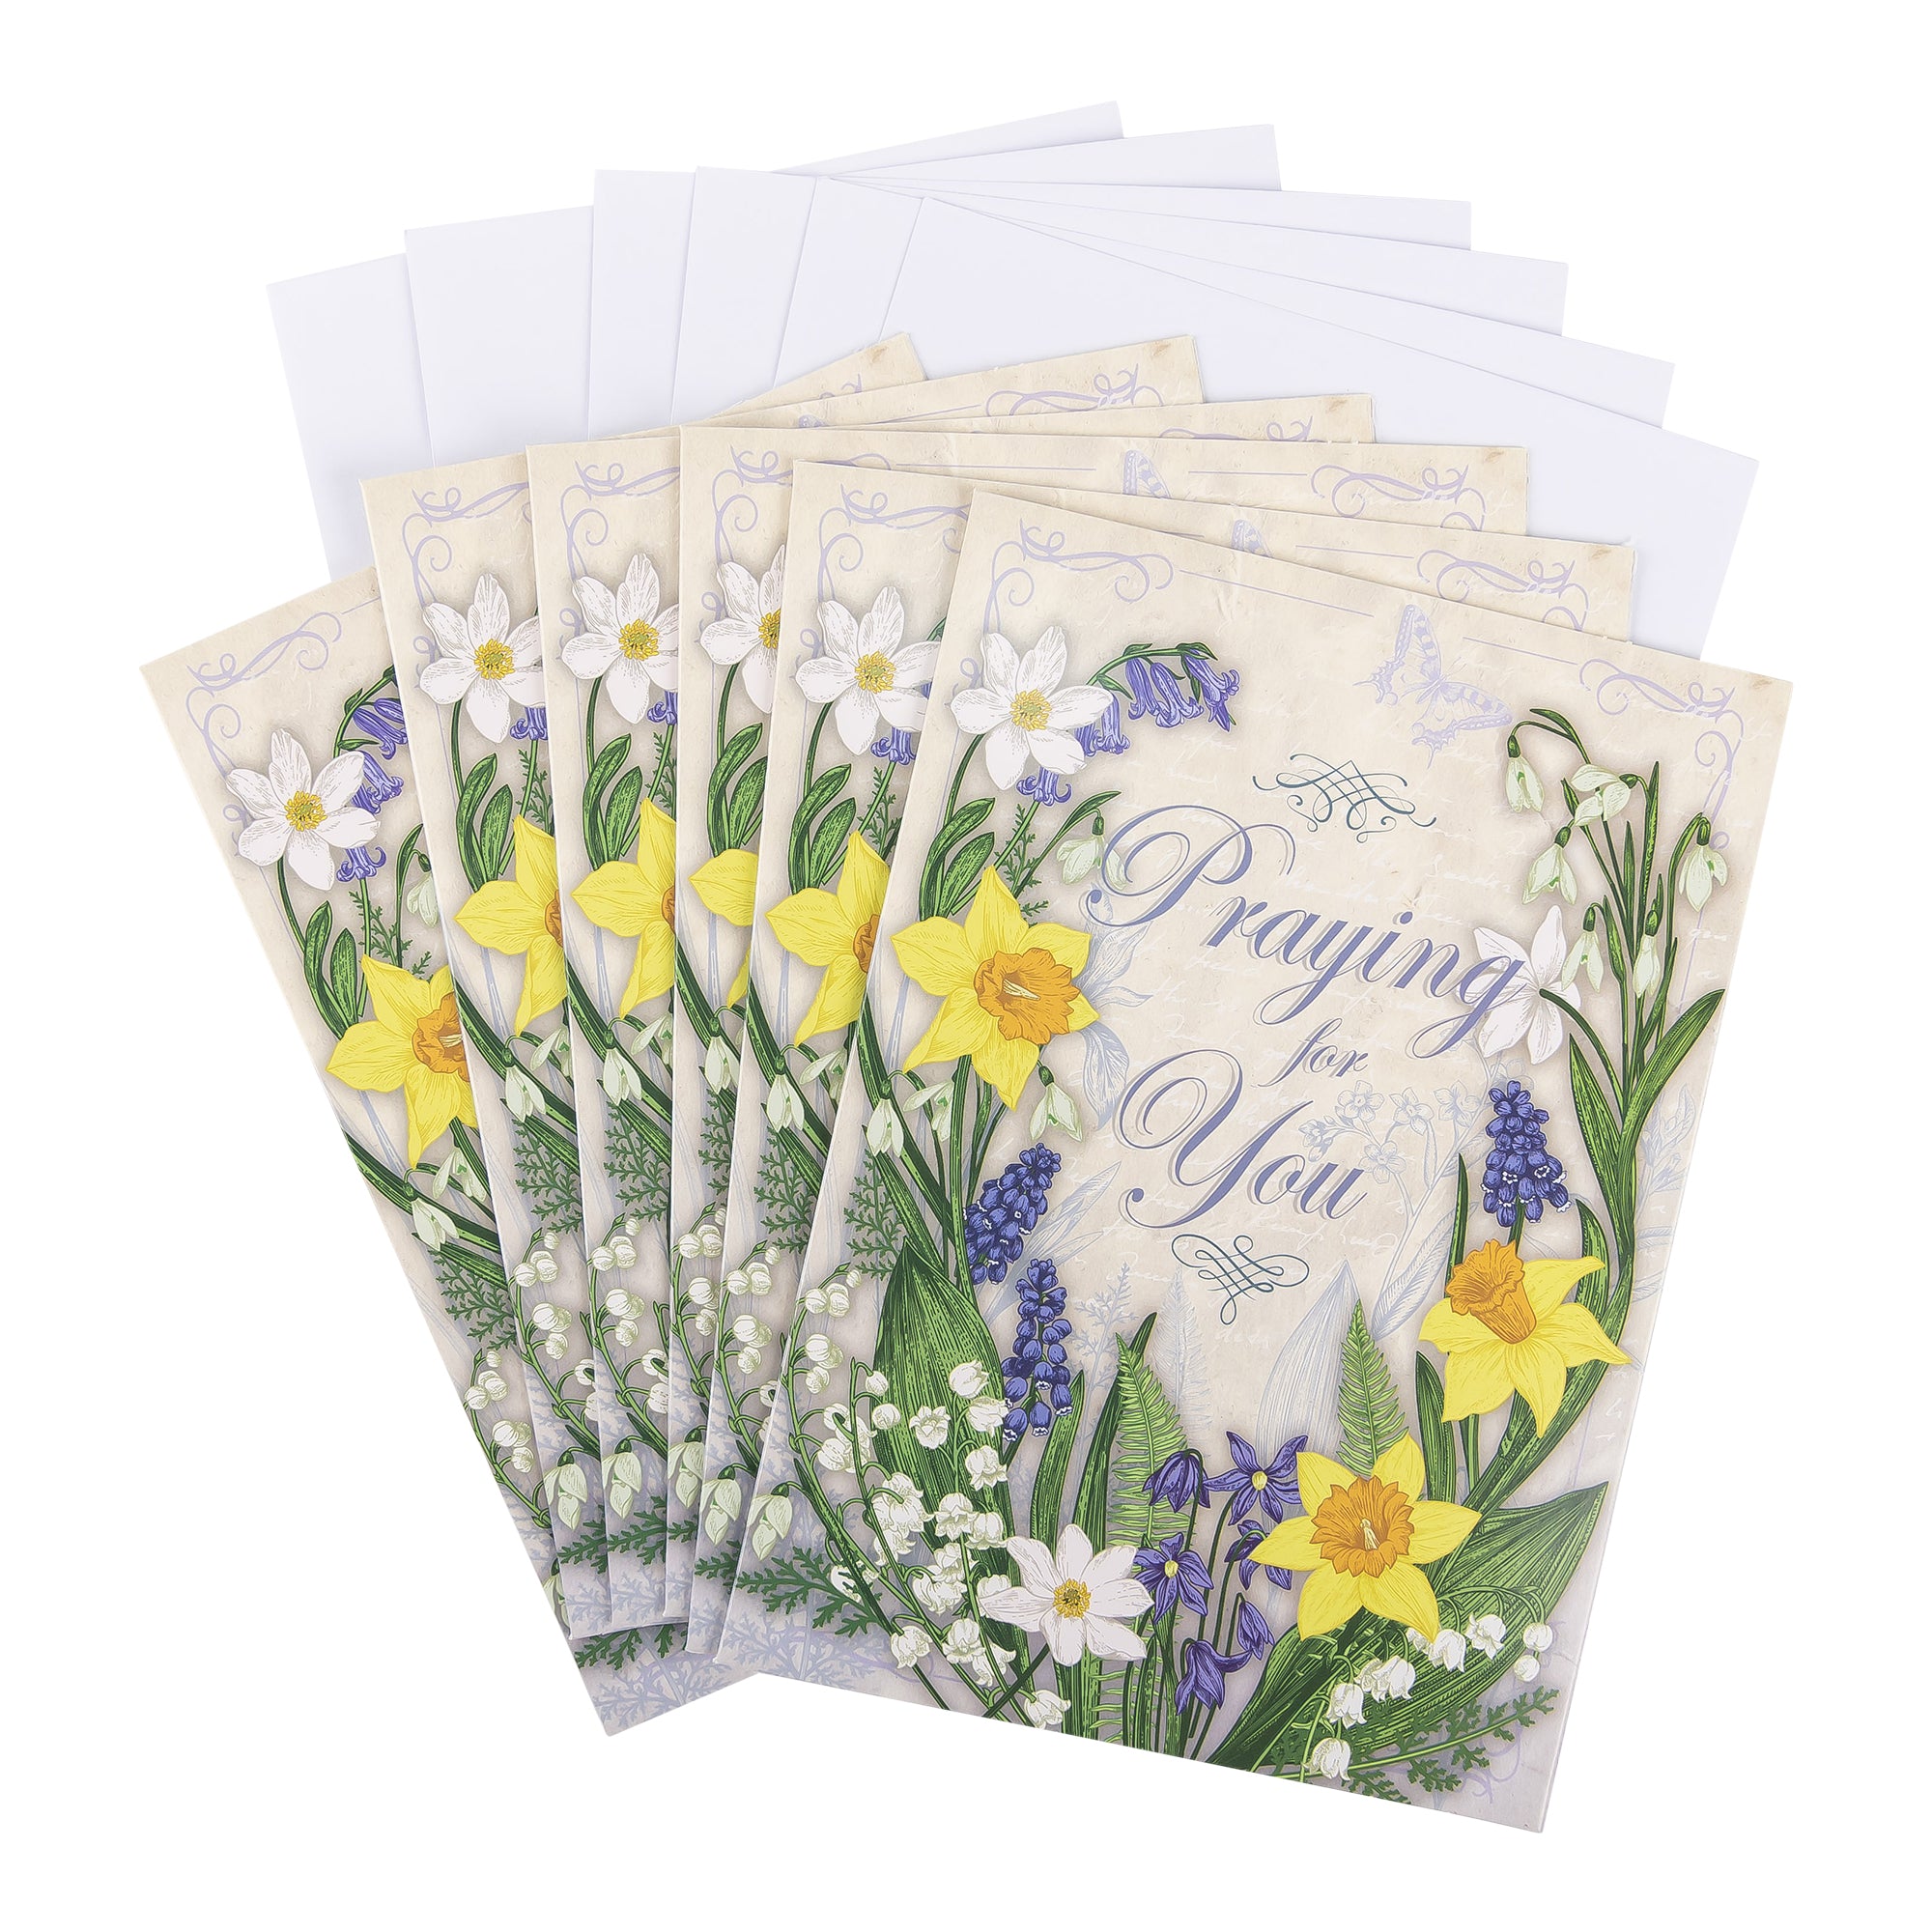 Single Cards - Praying for You - May God Colossians 1:3 (6 pk)